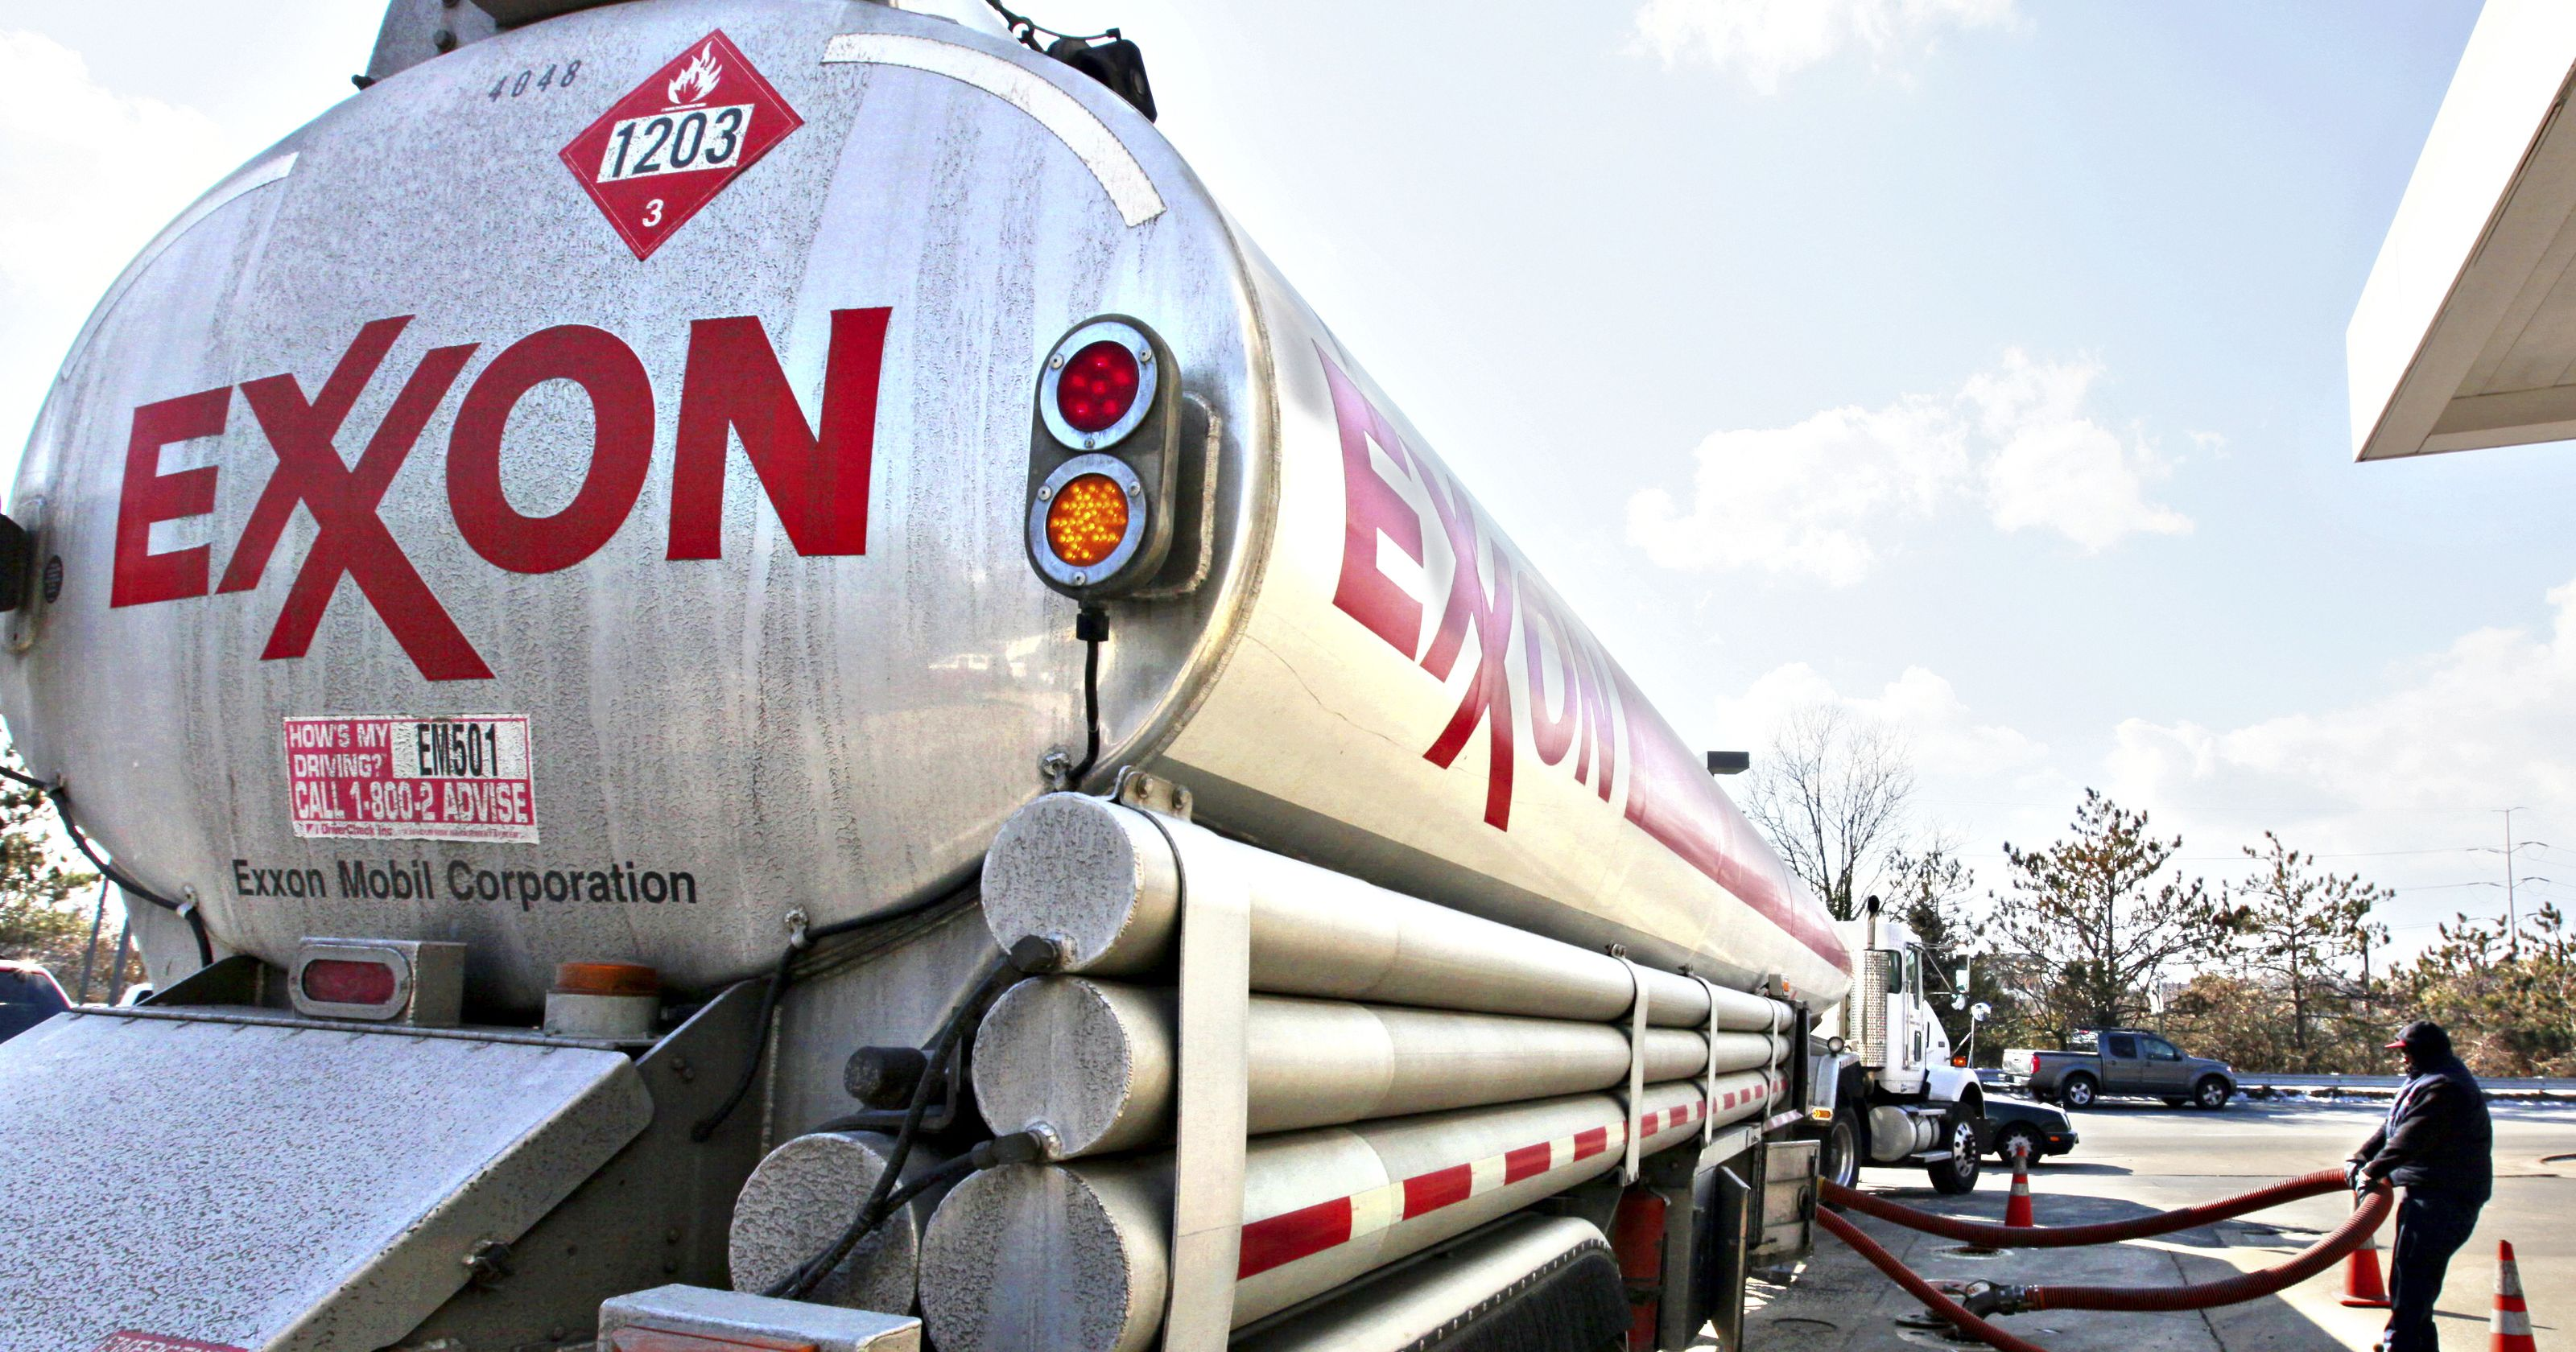 exxon-mobil-what-else-did-you-expect-exxon-mobil-corporation-nyse